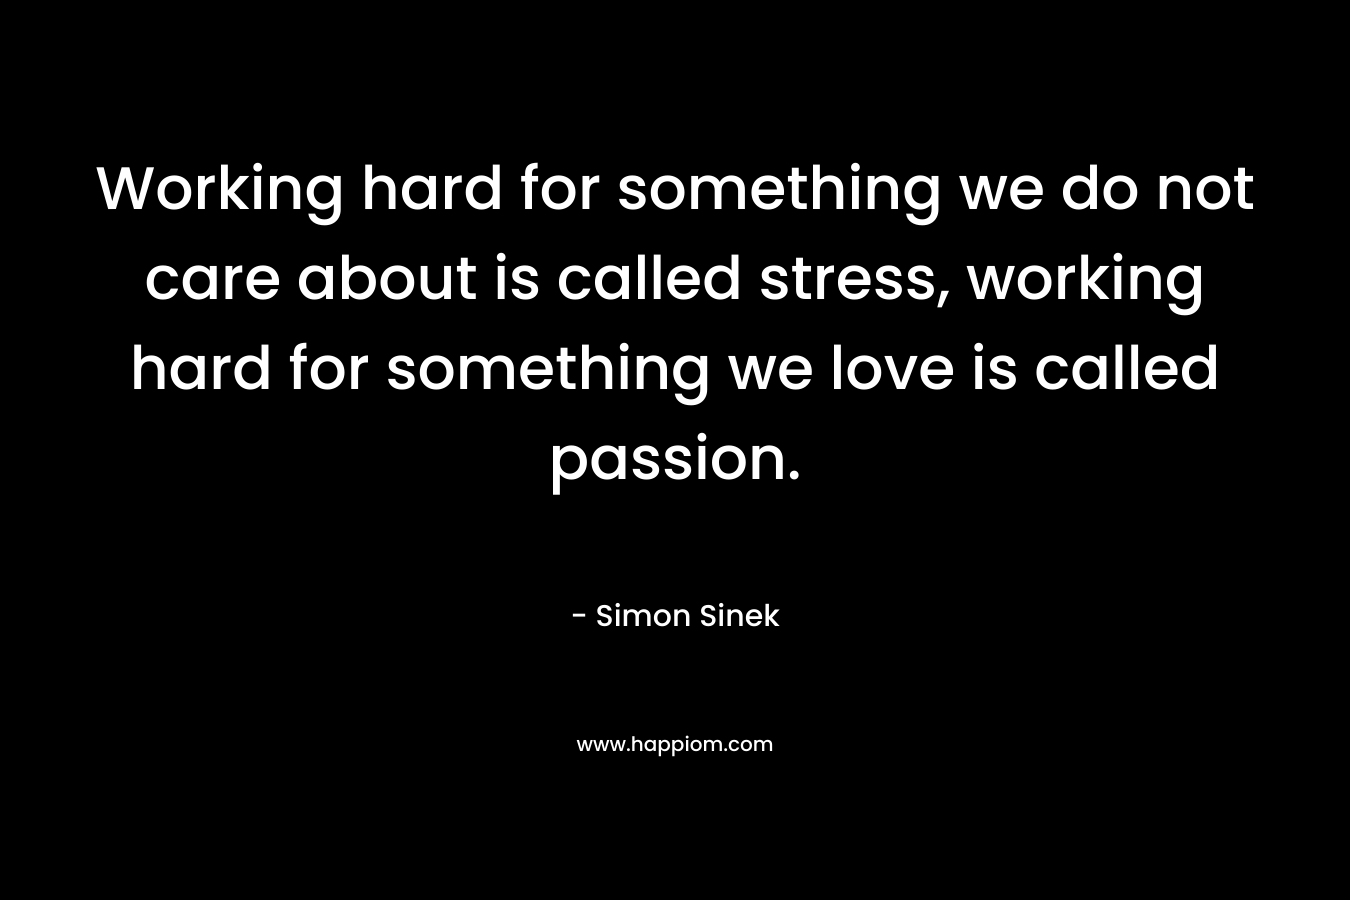 Working hard for something we do not care about is called stress, working hard for something we love is called passion. – Simon Sinek